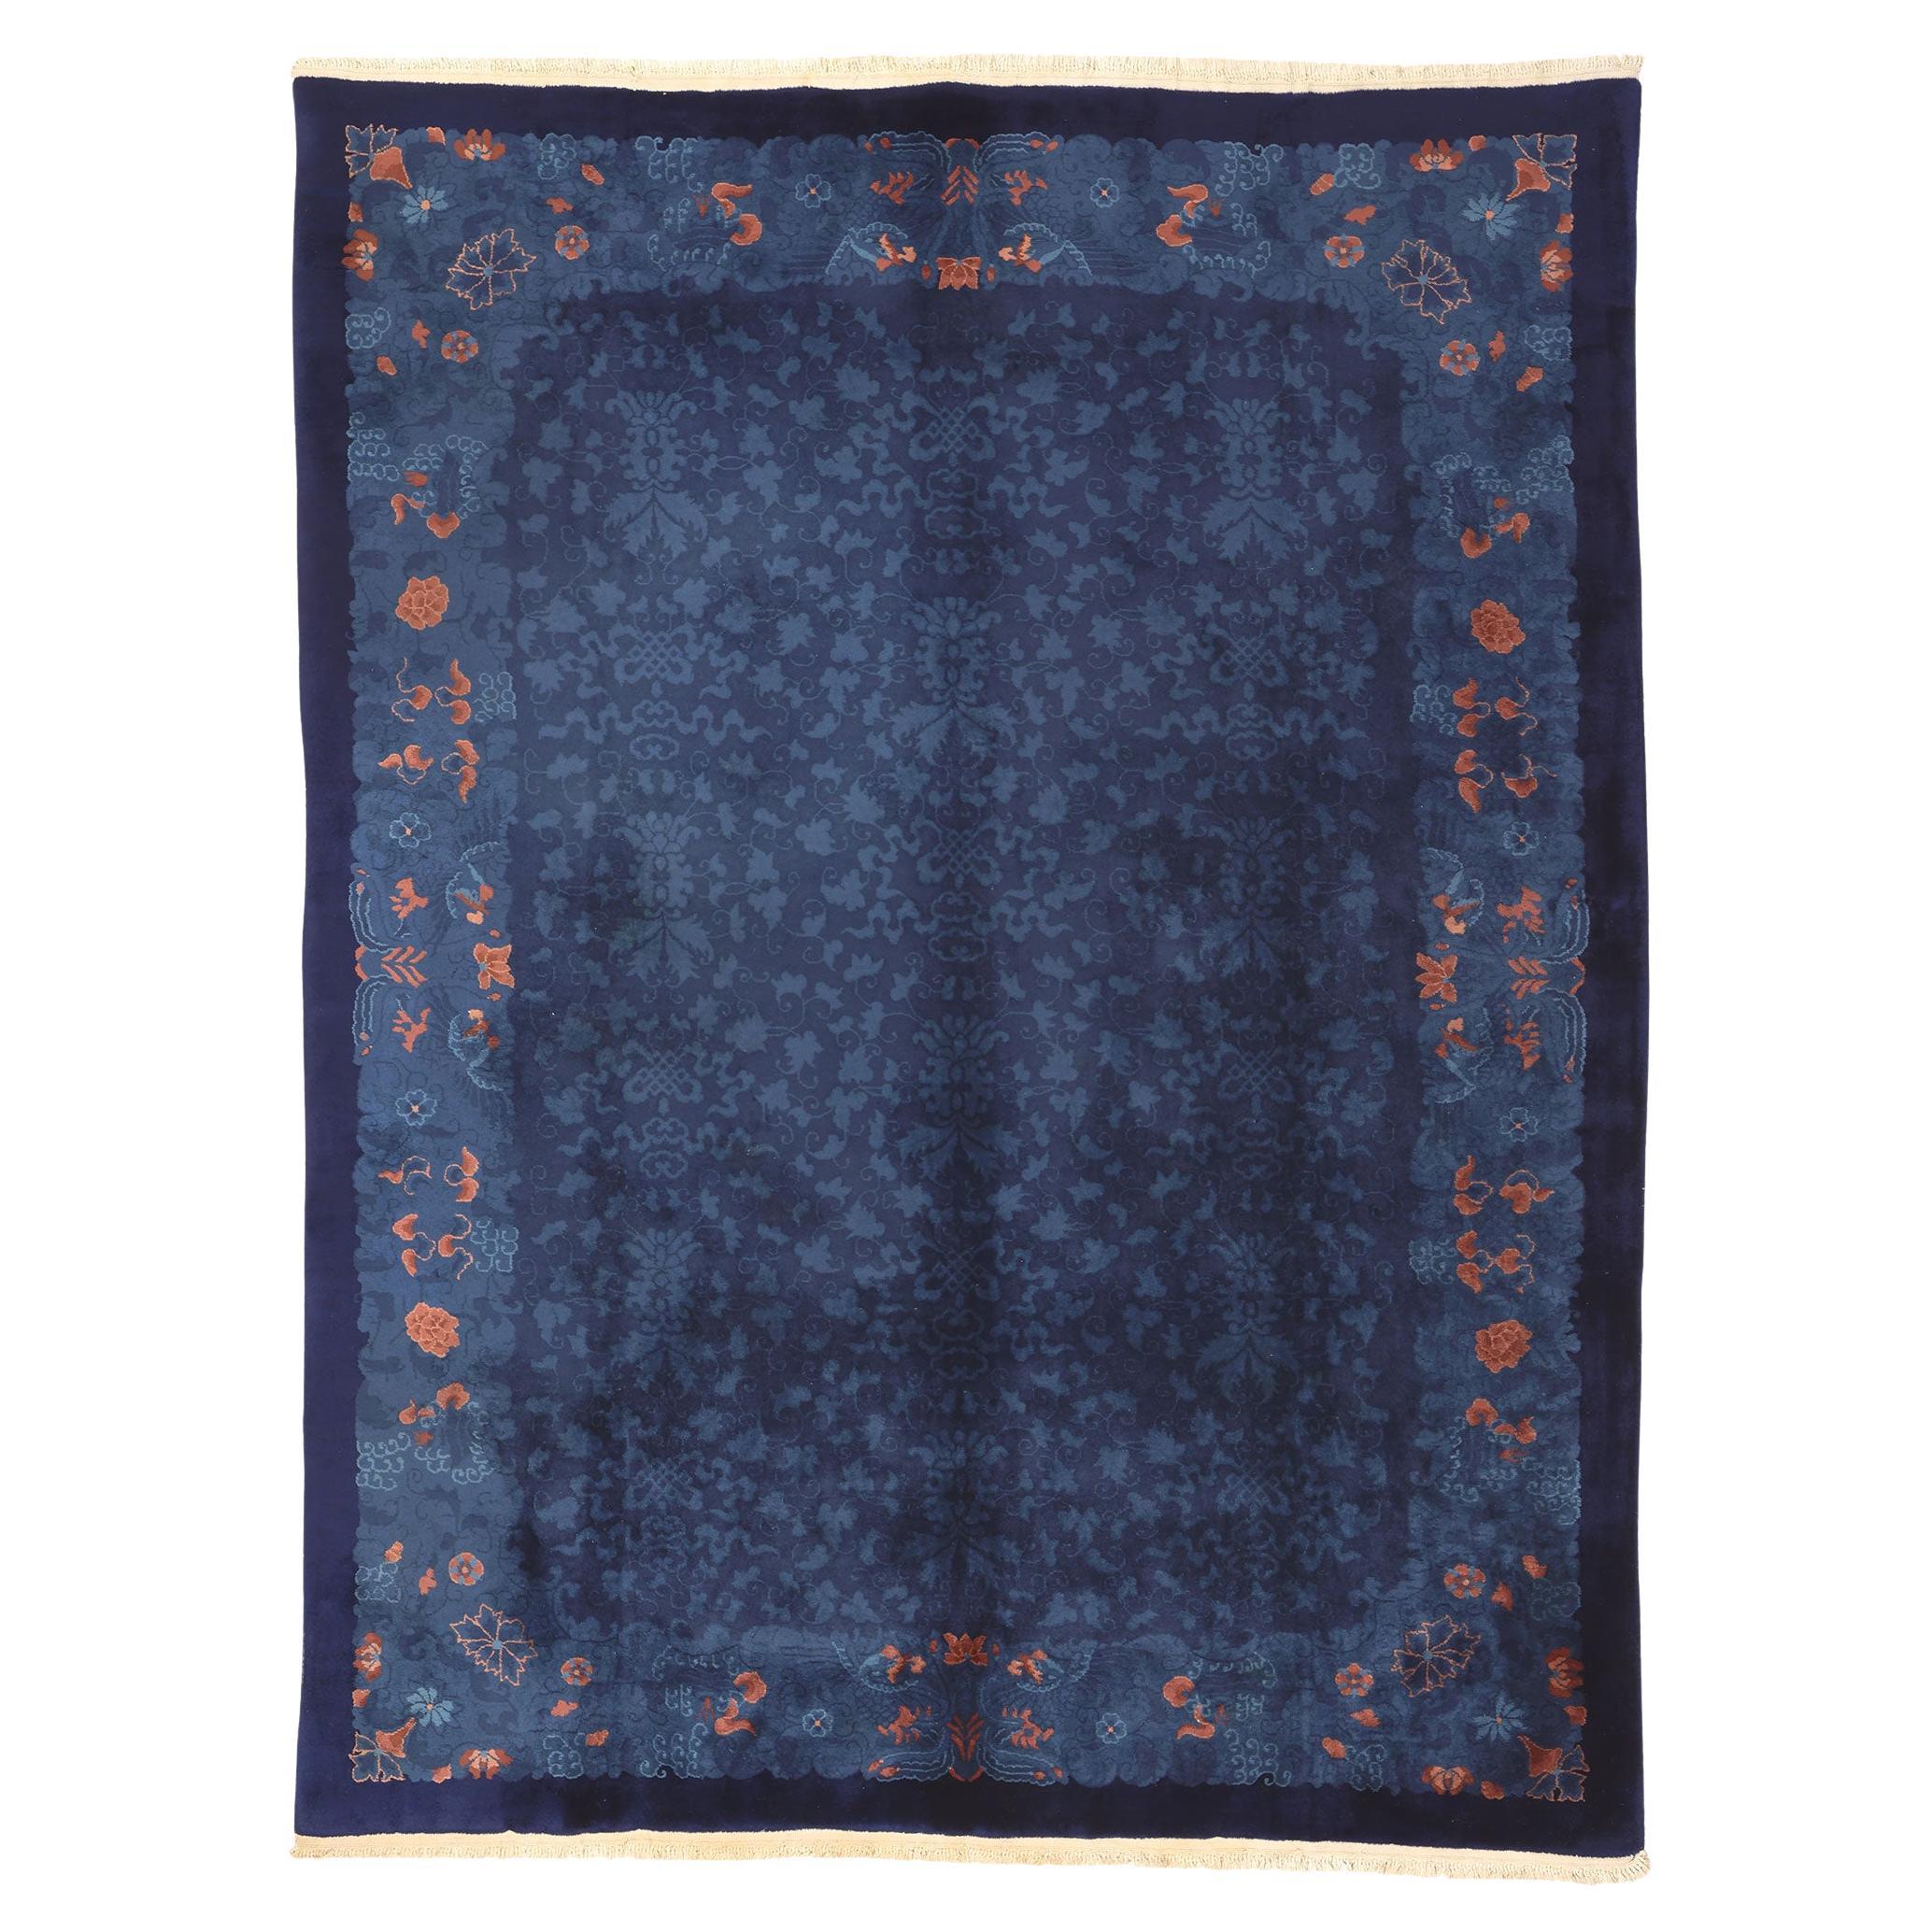 Antique Blue Chinese Art Deco Rug, Maximalist Style Meets Qing Dynasty For Sale